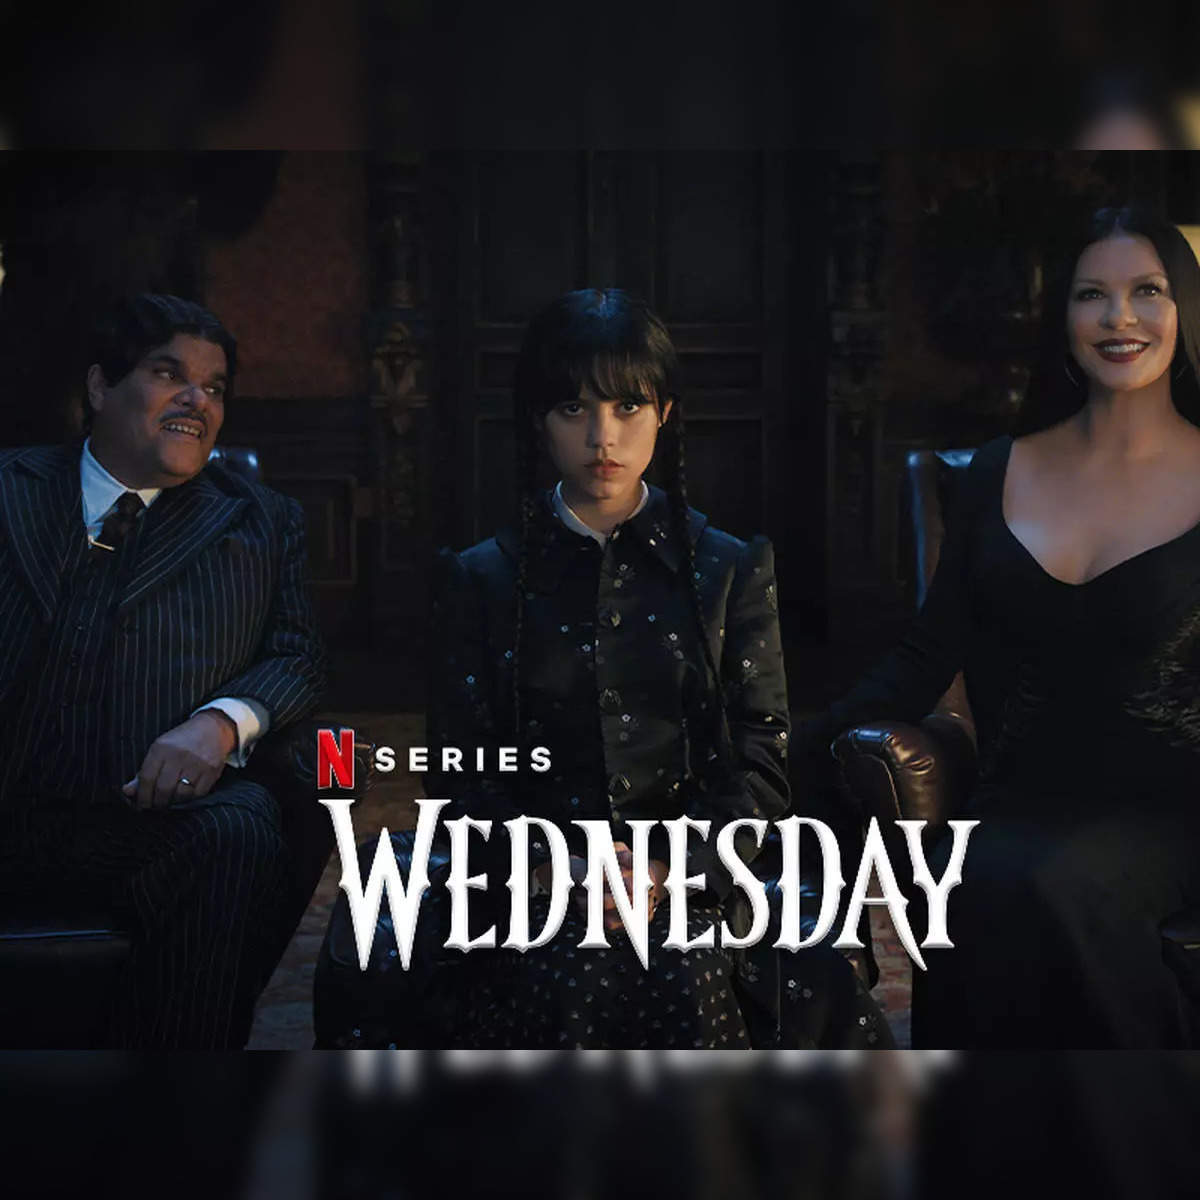 Wednesday' Season 2: The Cast, Possible Release Date & More